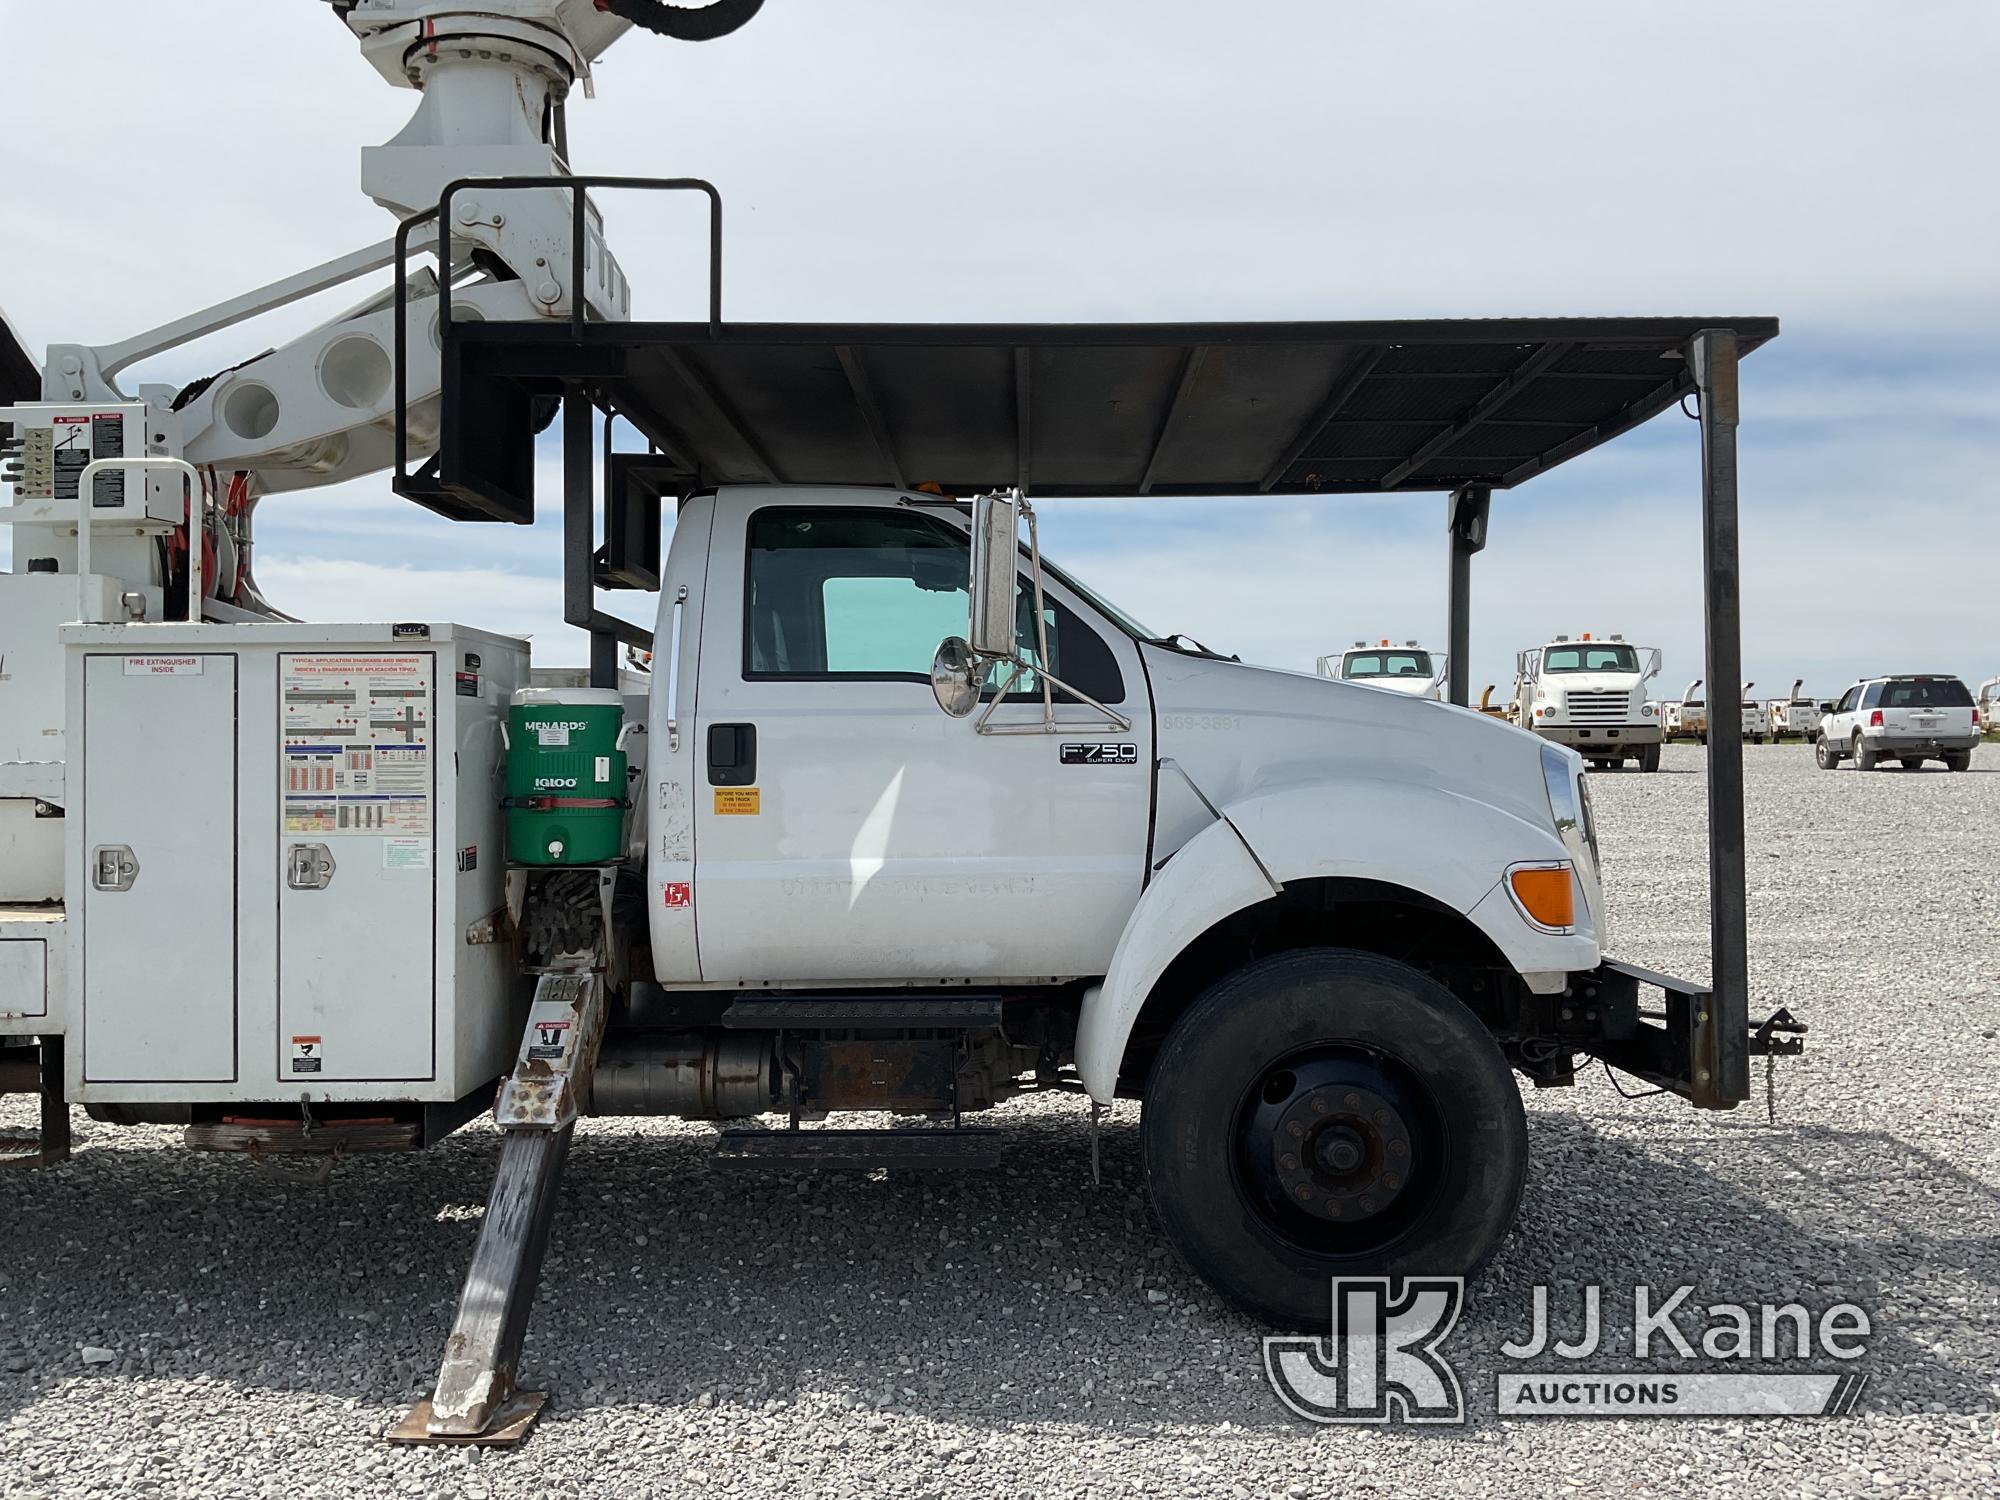 (Hawk Point, MO) Altec LR760E70, Over-Center Elevator Bucket mounted behind cab on 2013 Ford F750 Ch